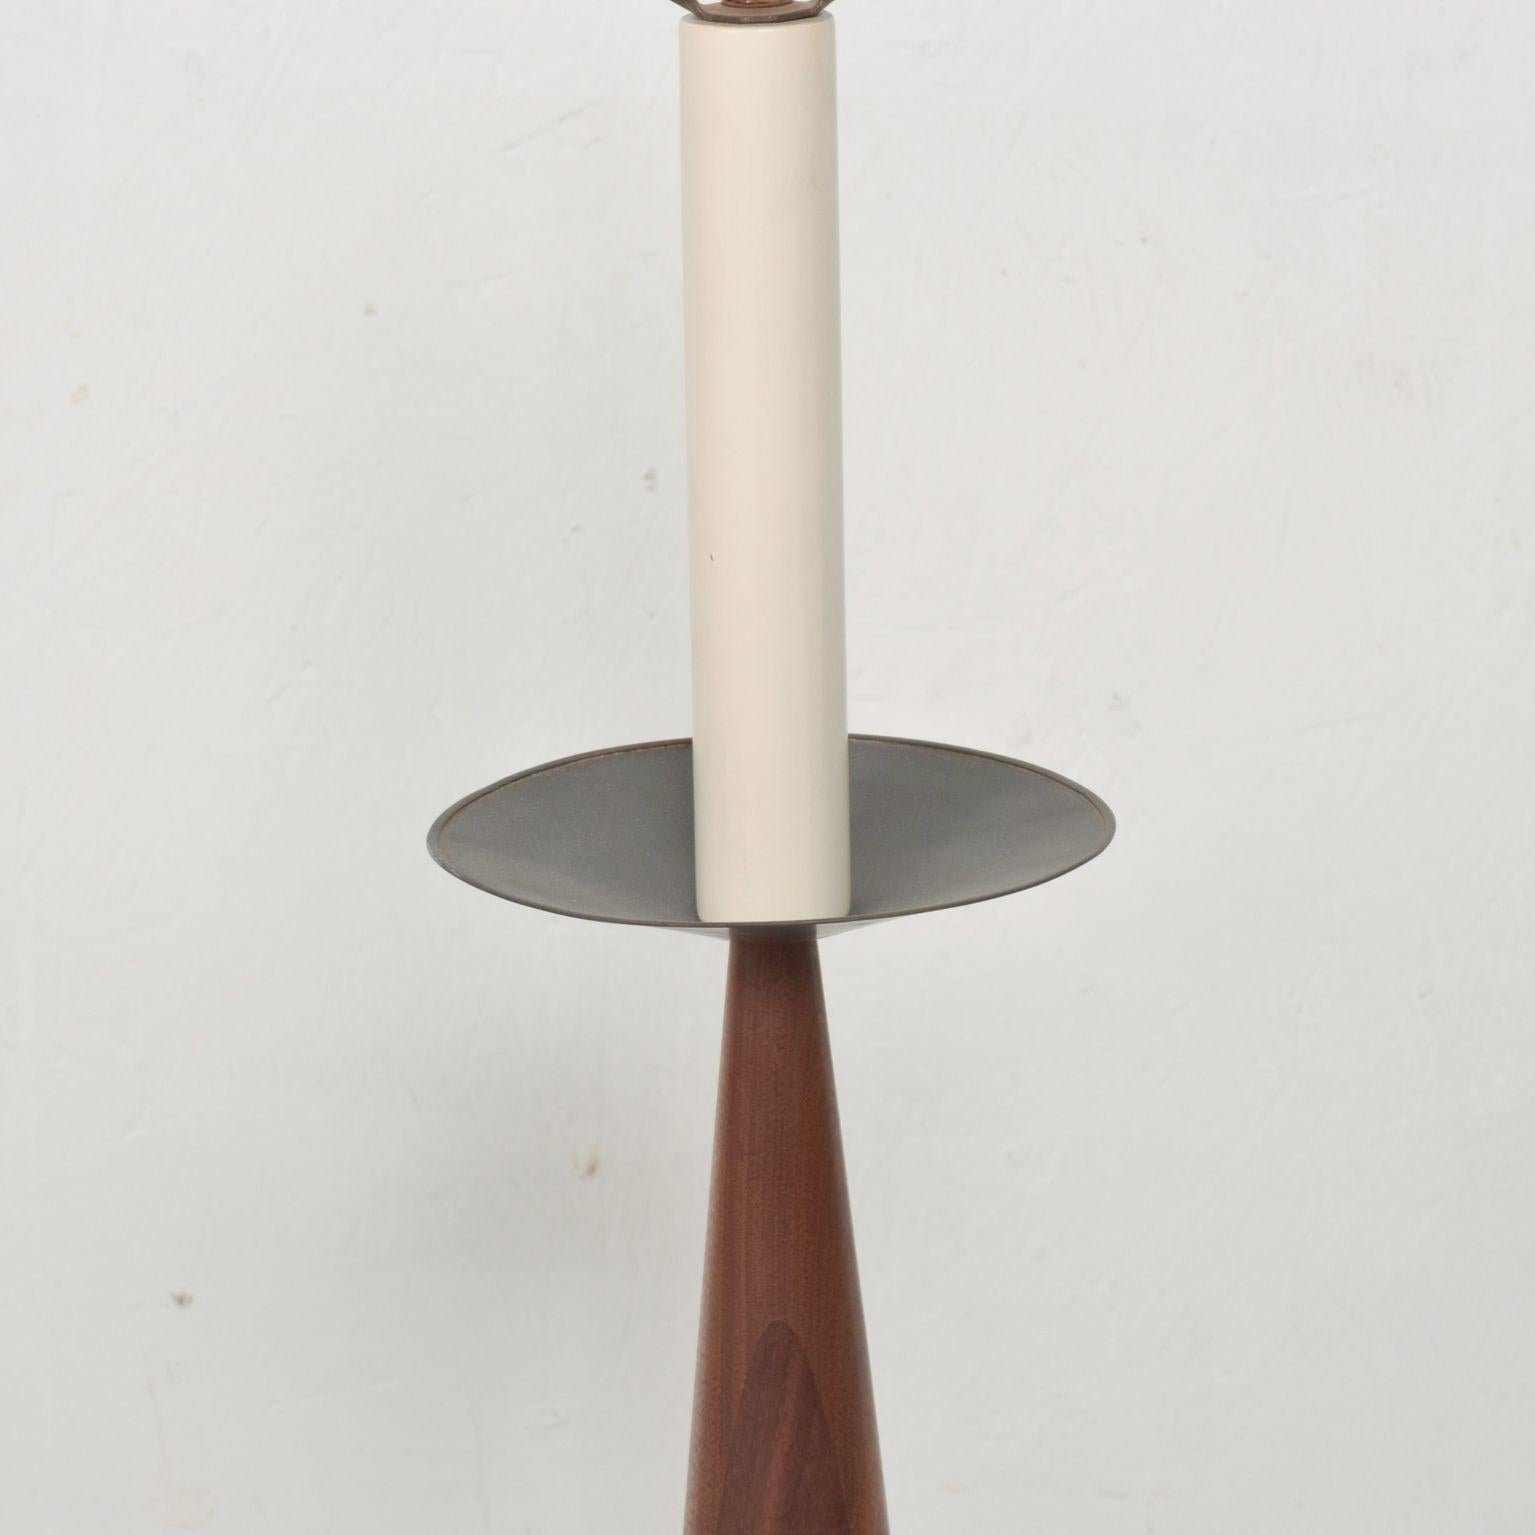 Table Lamp
Mexican Modernist Clean Custom Cone Table Lamp in Mahogany wood and Bronze.
Dimensions: 24 H x 6 in diameter
Original Preowned Vintage Condition. Please see our images.
Lamp shade not included- for display purposes only.
